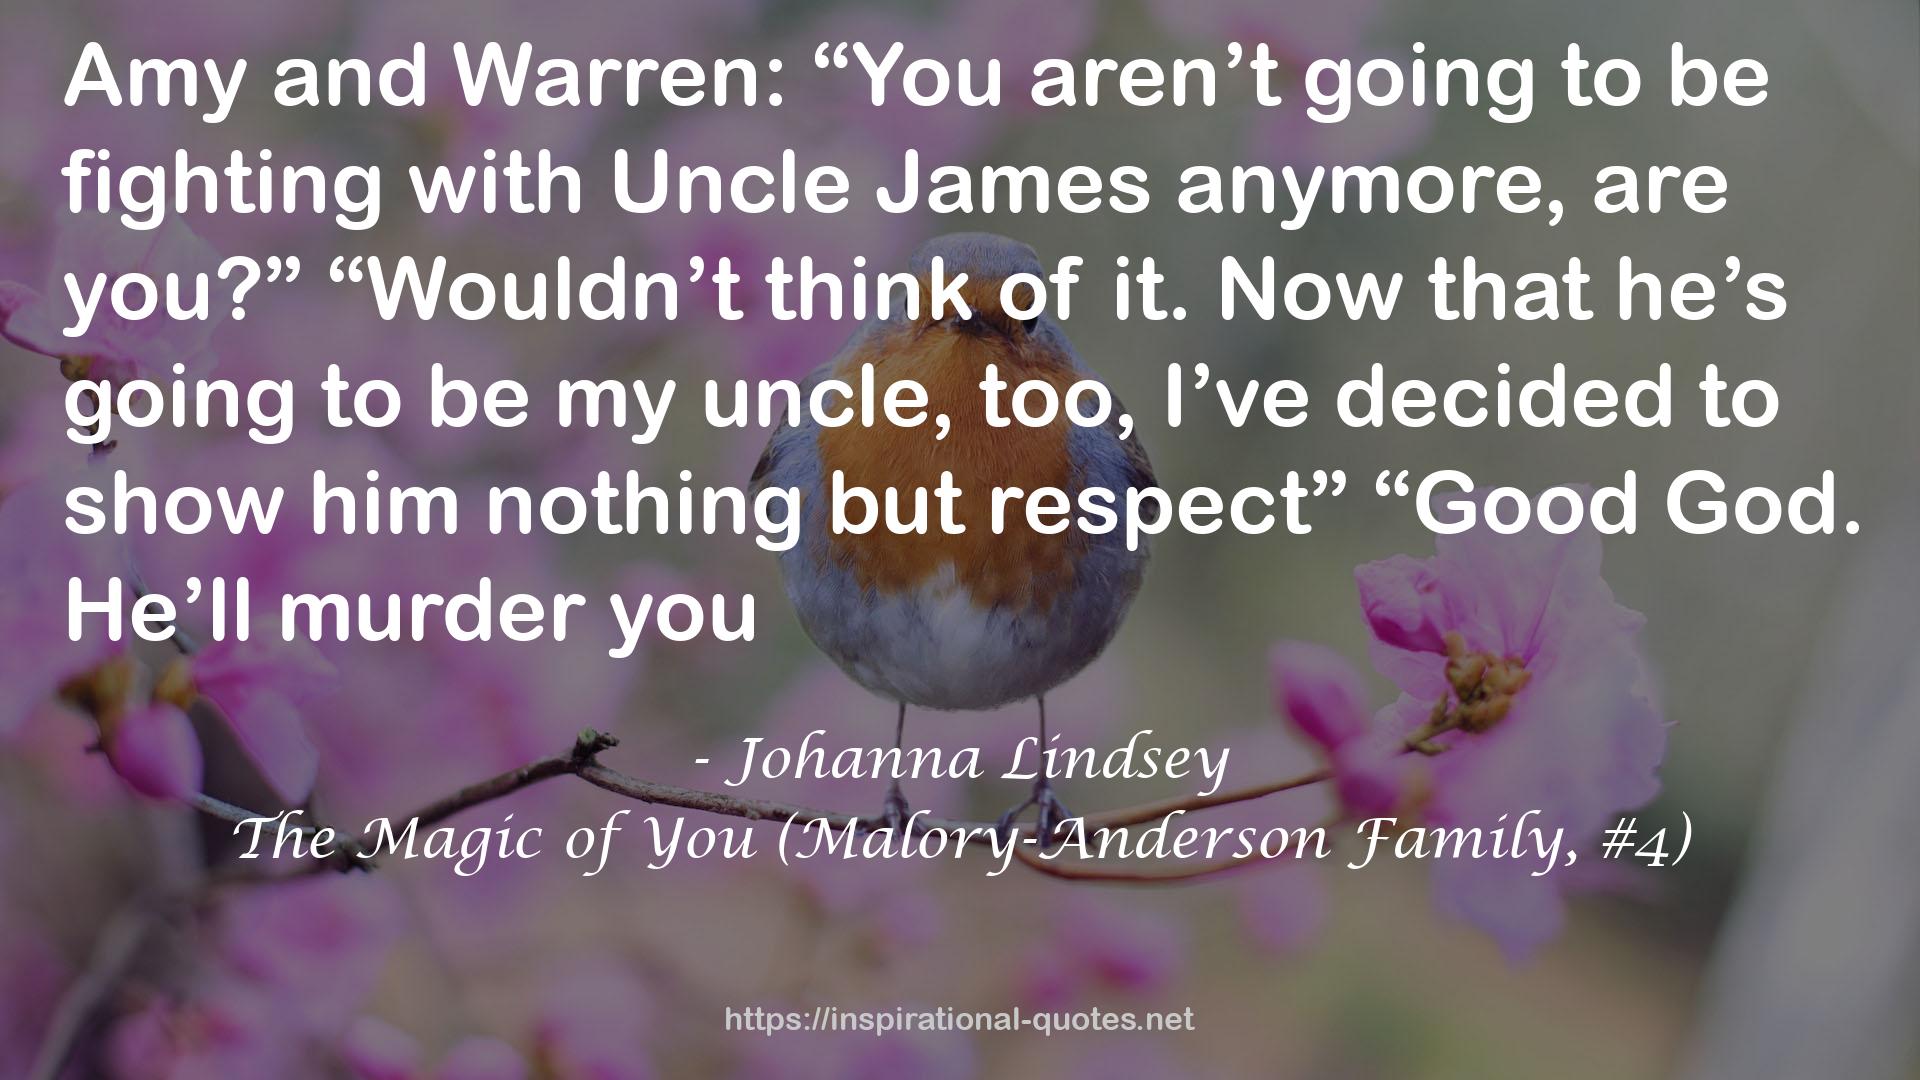 The Magic of You (Malory-Anderson Family, #4) QUOTES